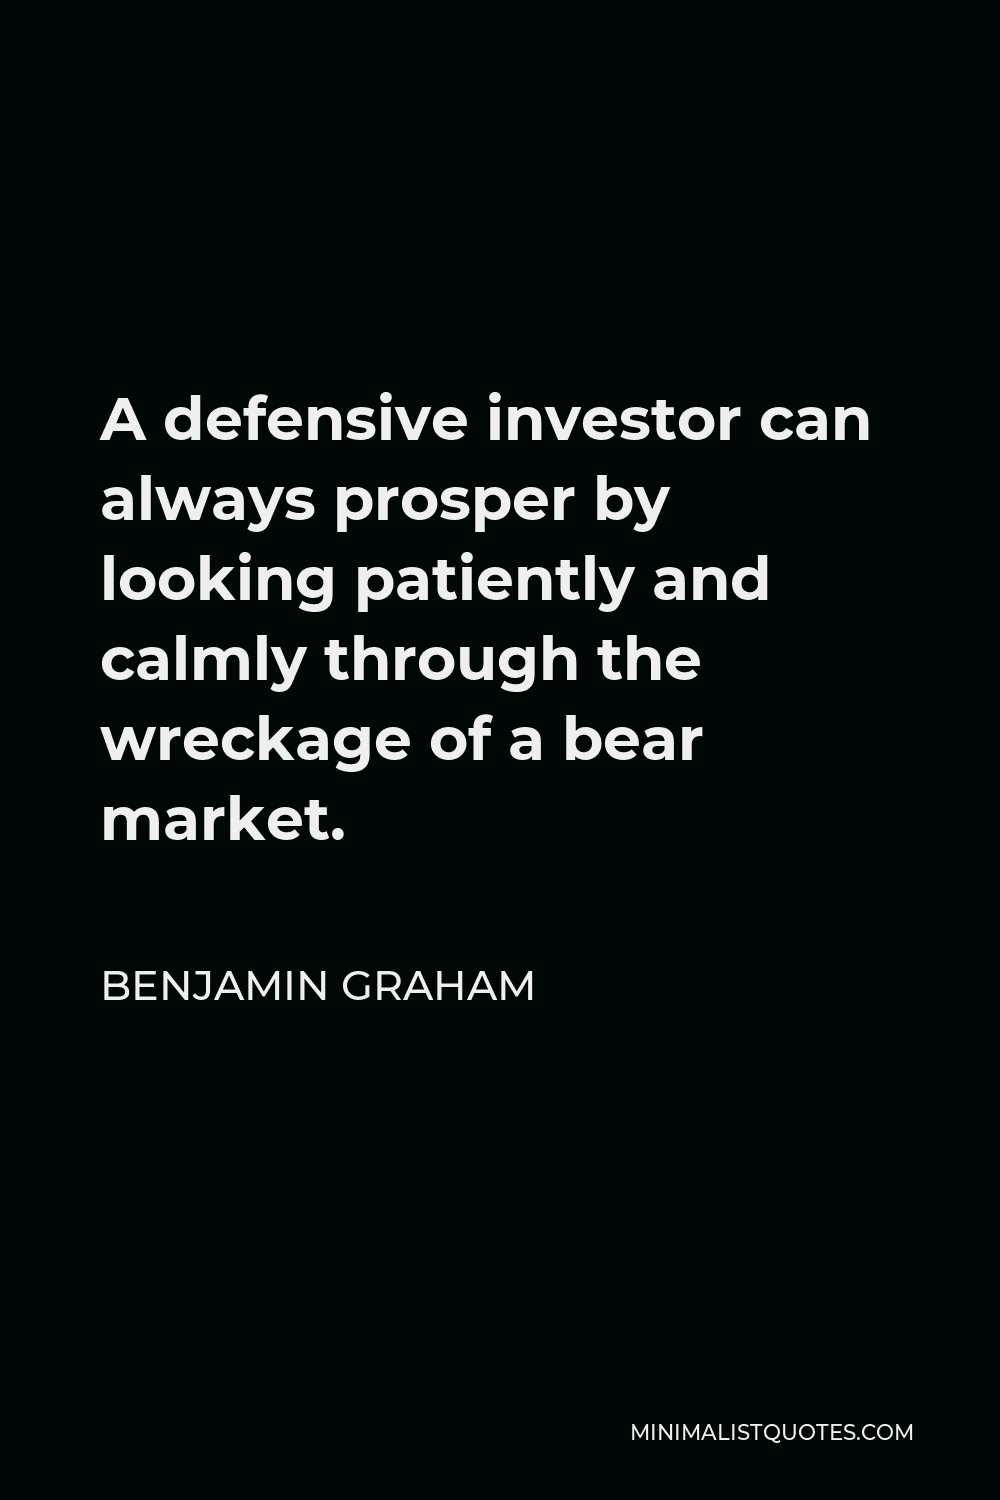 Benjamin Graham Quote - A defensive investor can always prosper by looking patiently and calmly through the wreckage of a bear market.